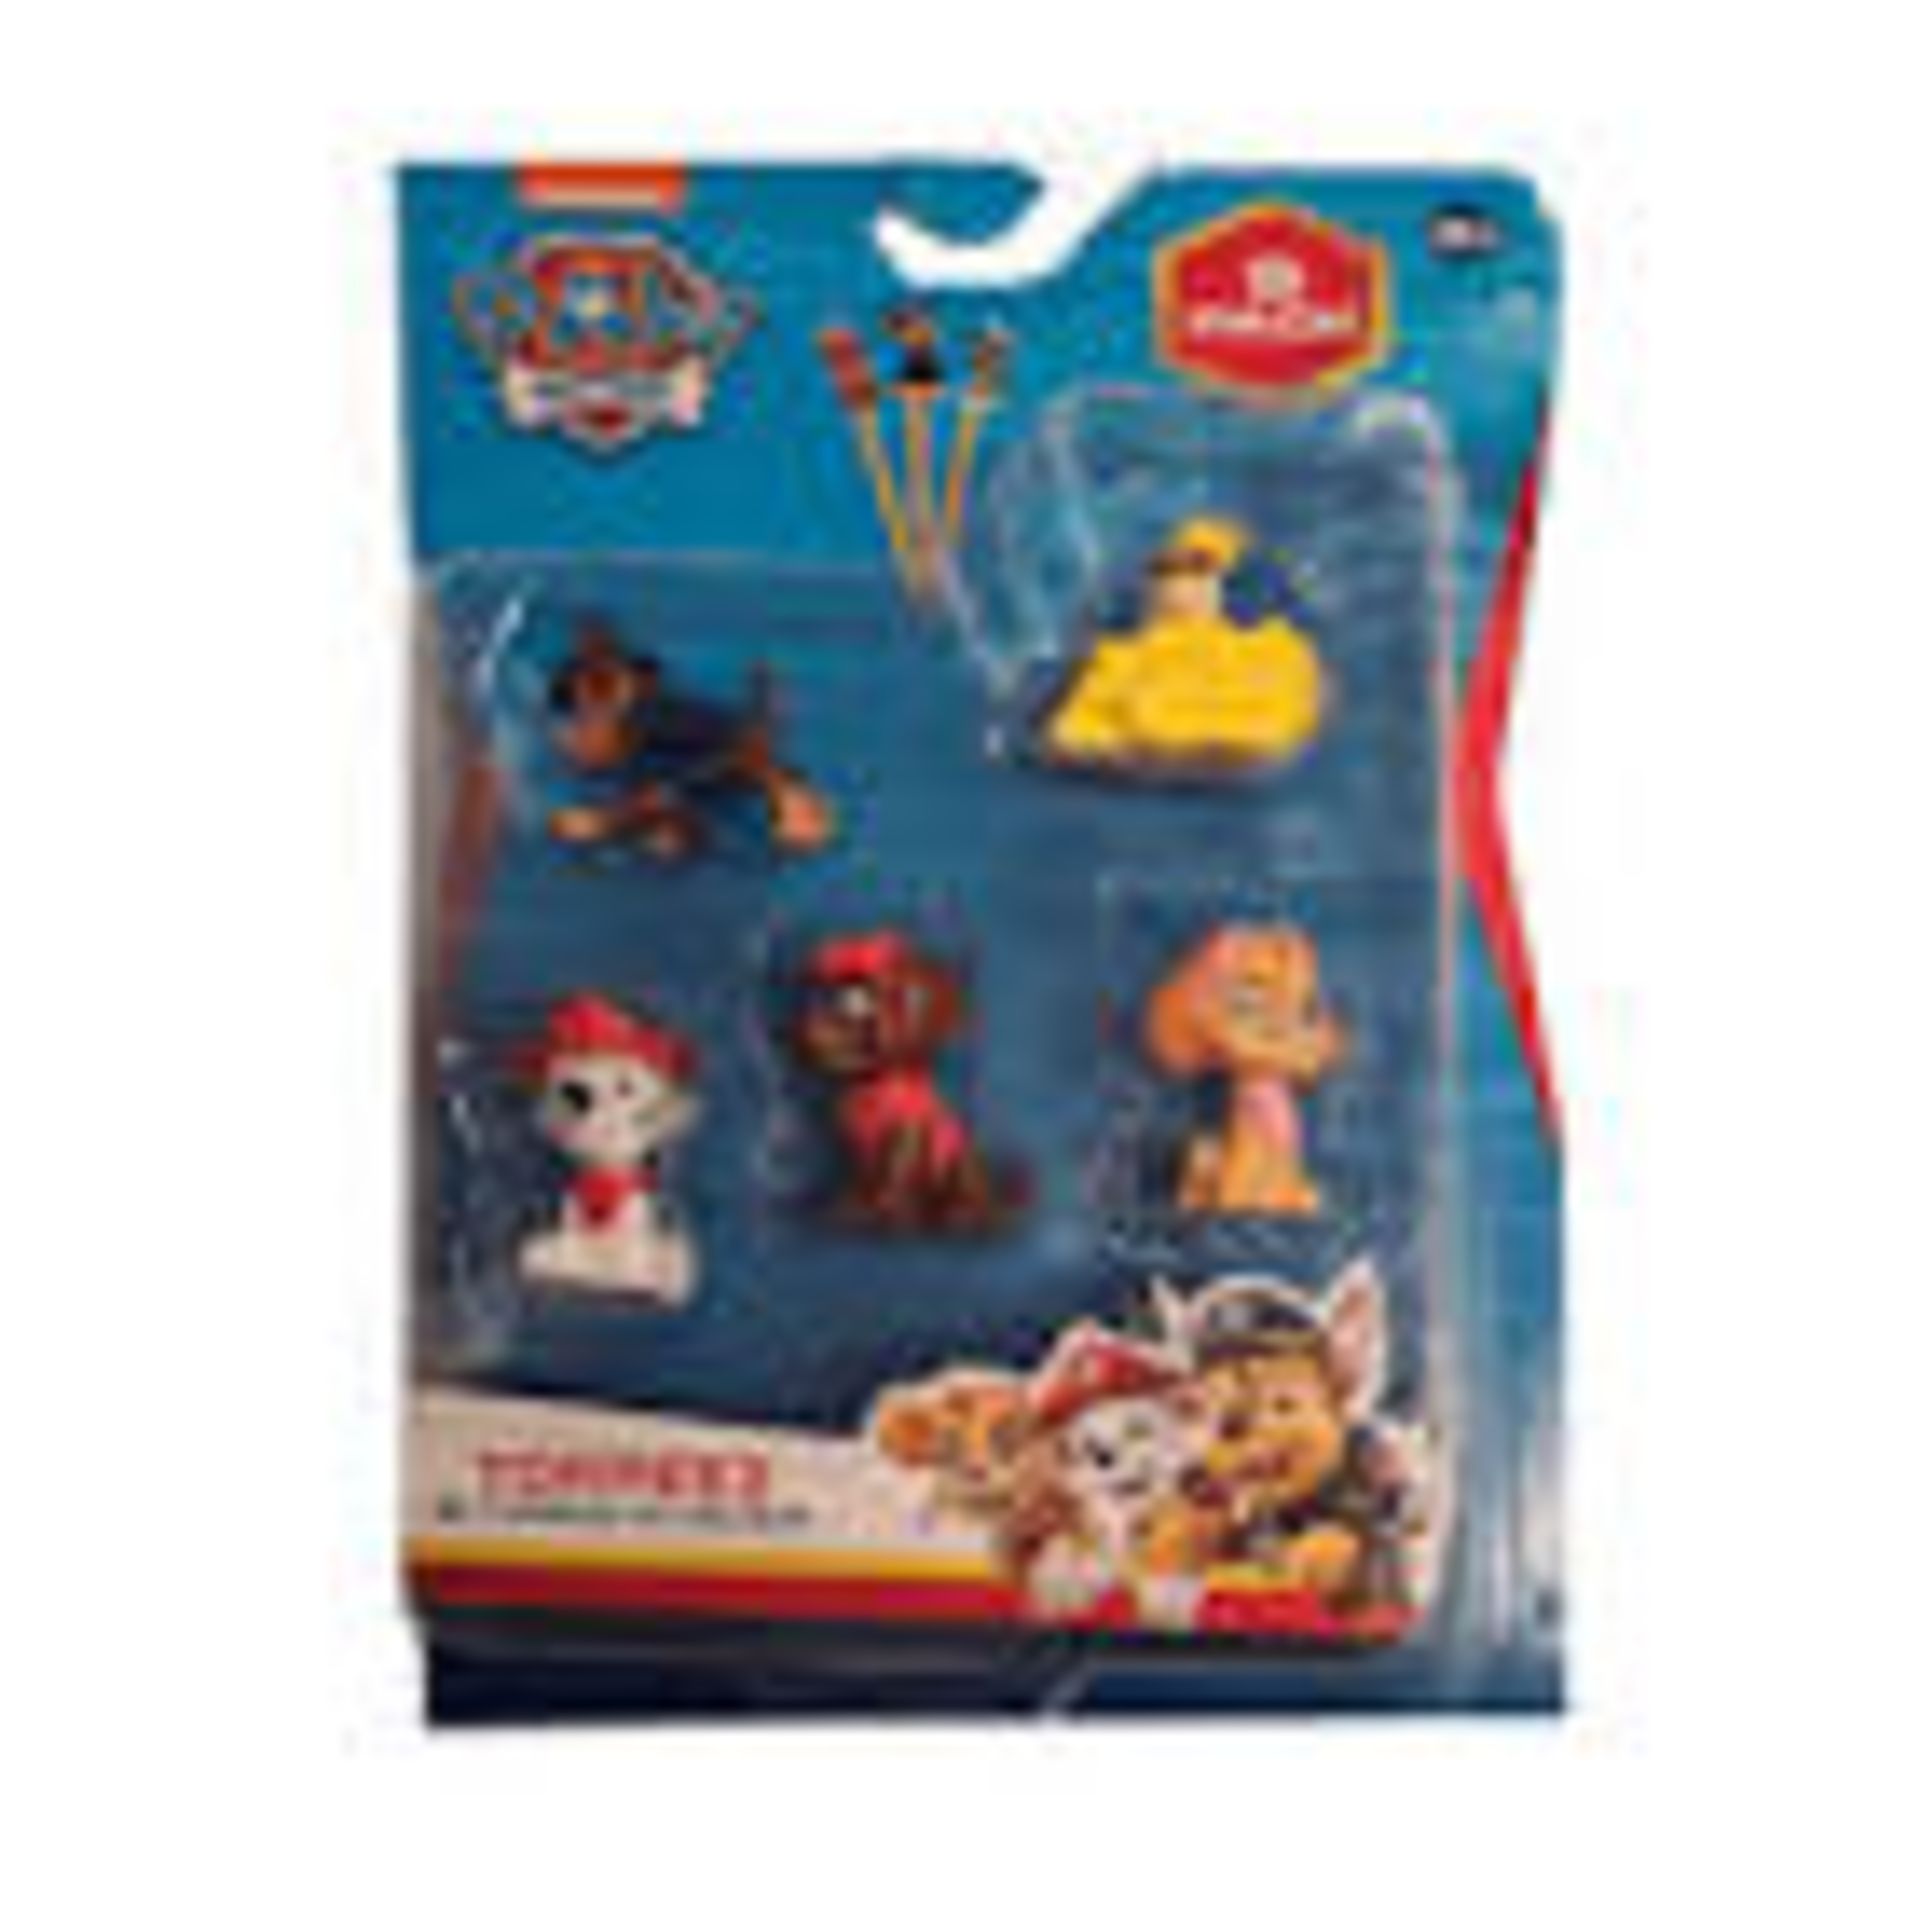 100 x Paw Patrol Toppers/Stamper Sets - Image 3 of 6